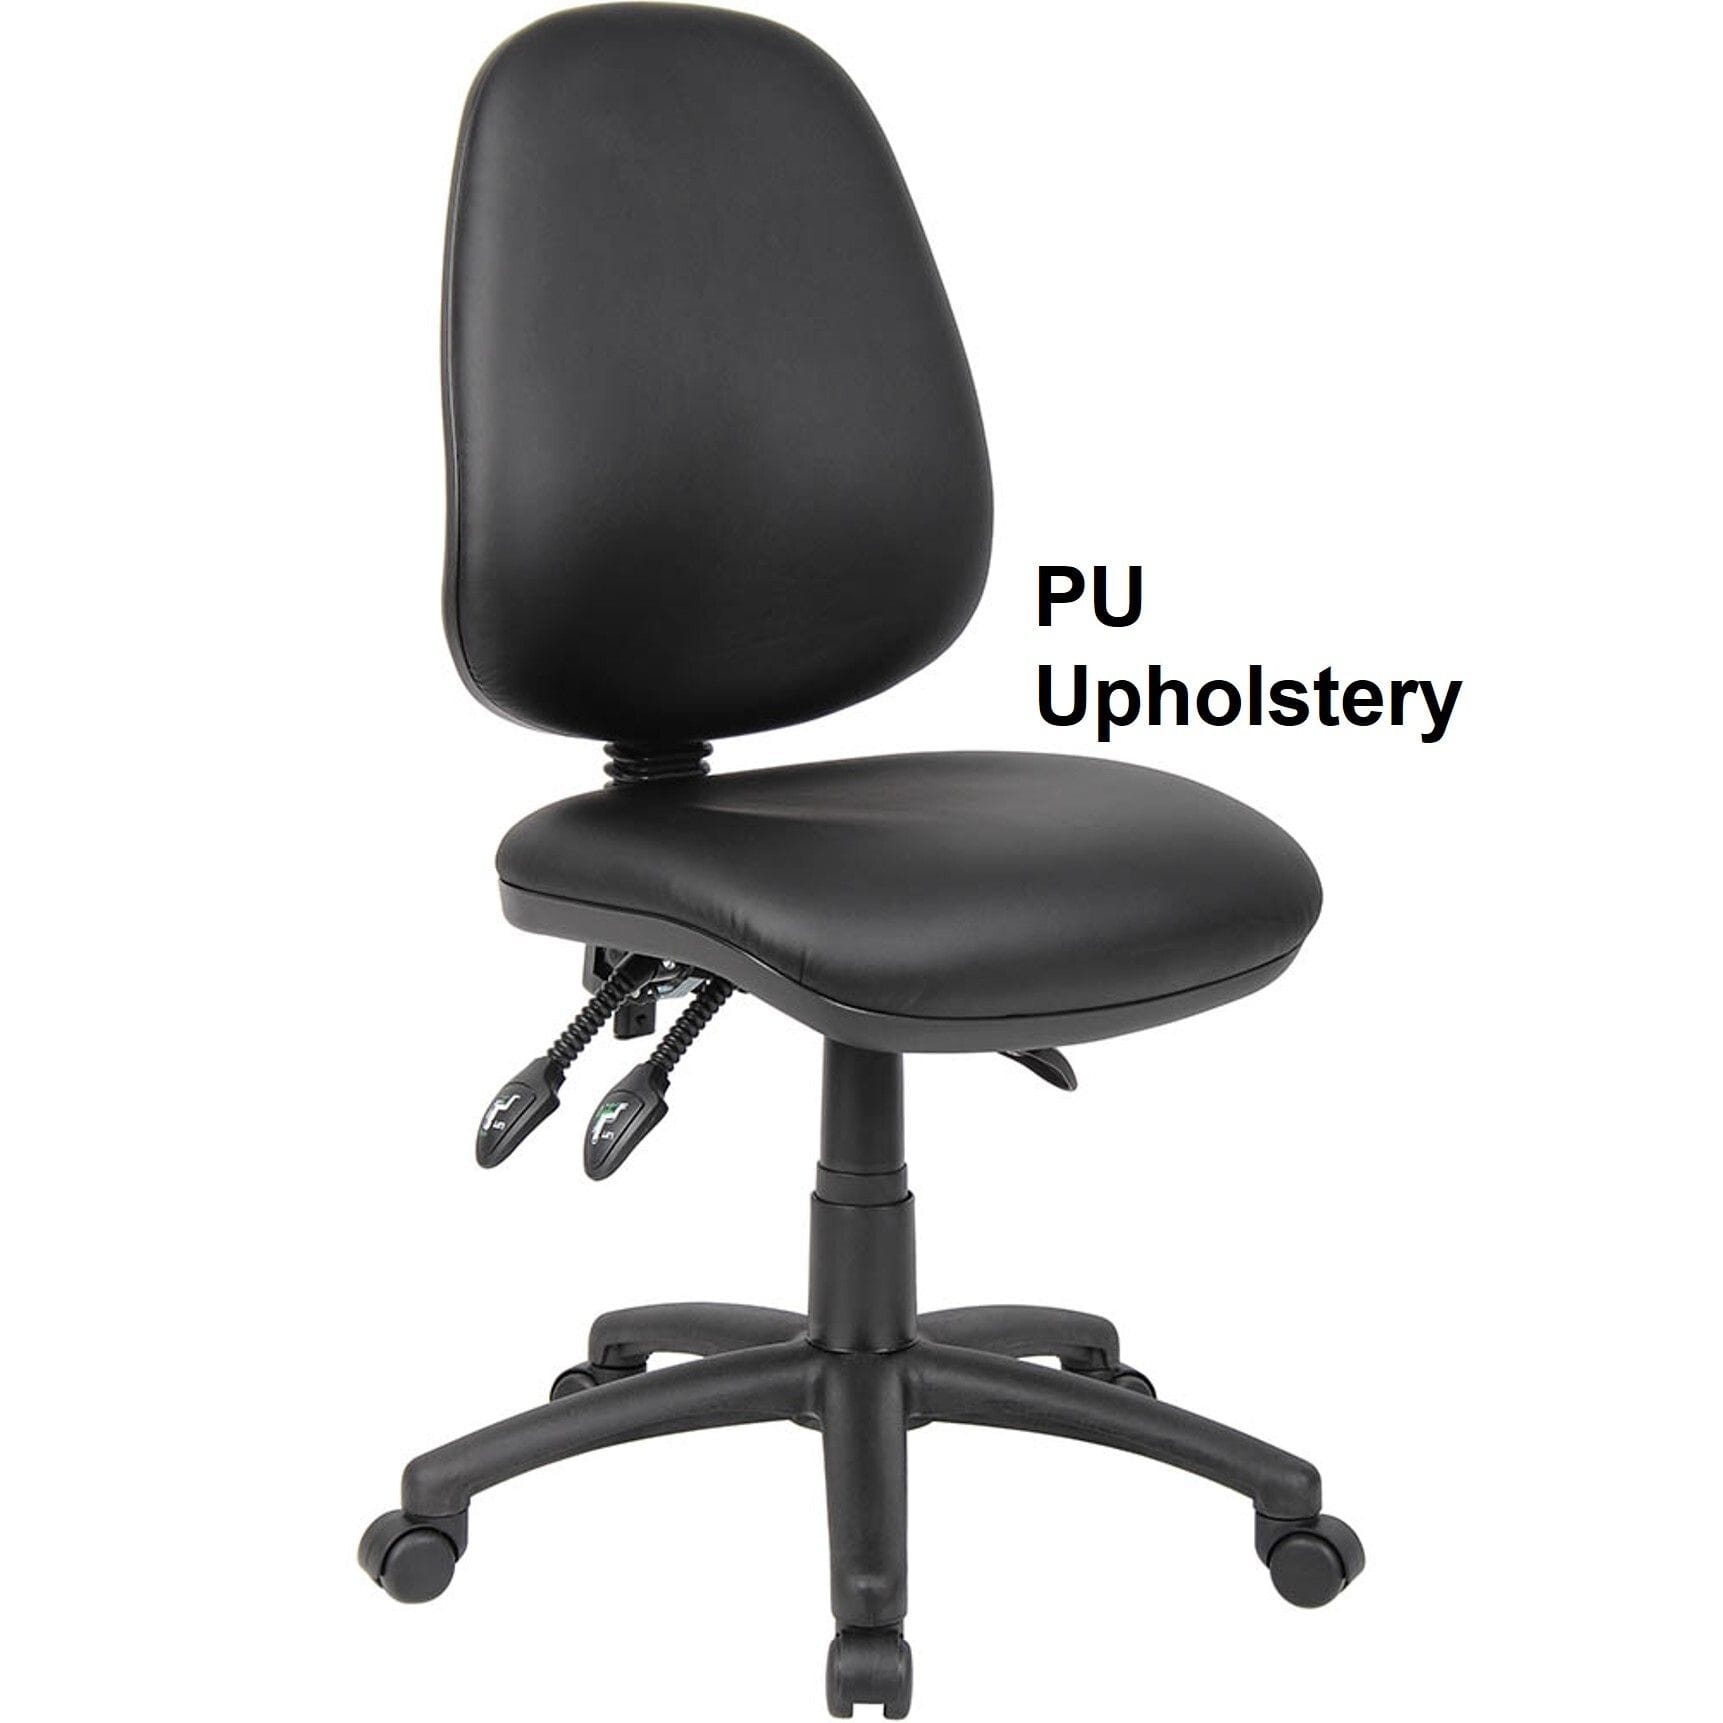 Typist Office Chair - PU Upholstery